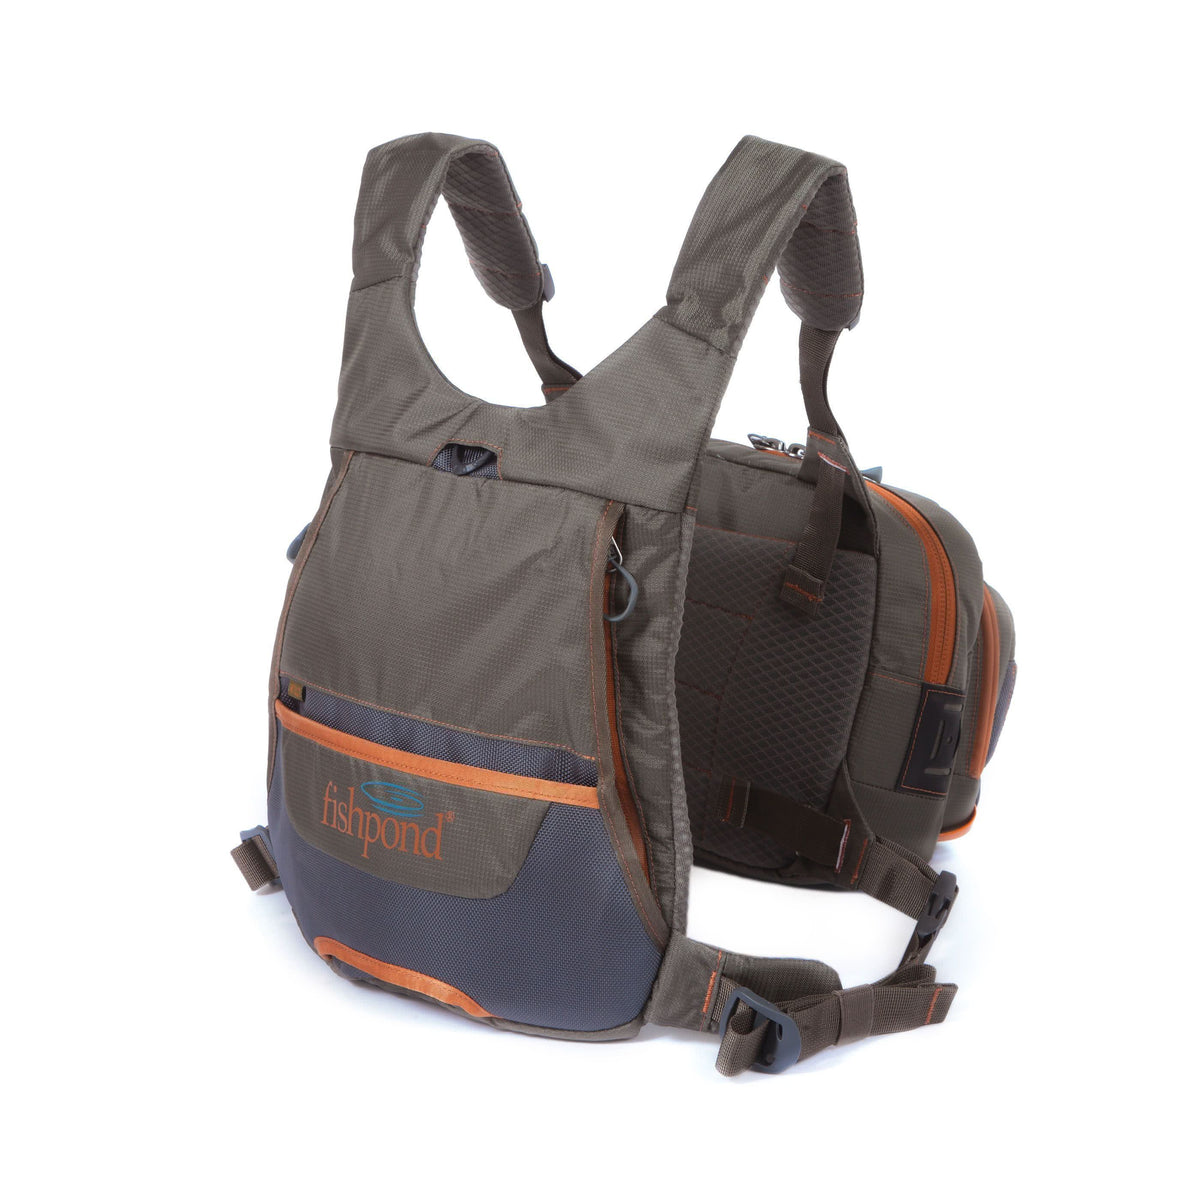 Fishpond Cross Current Chest Pack Back 2